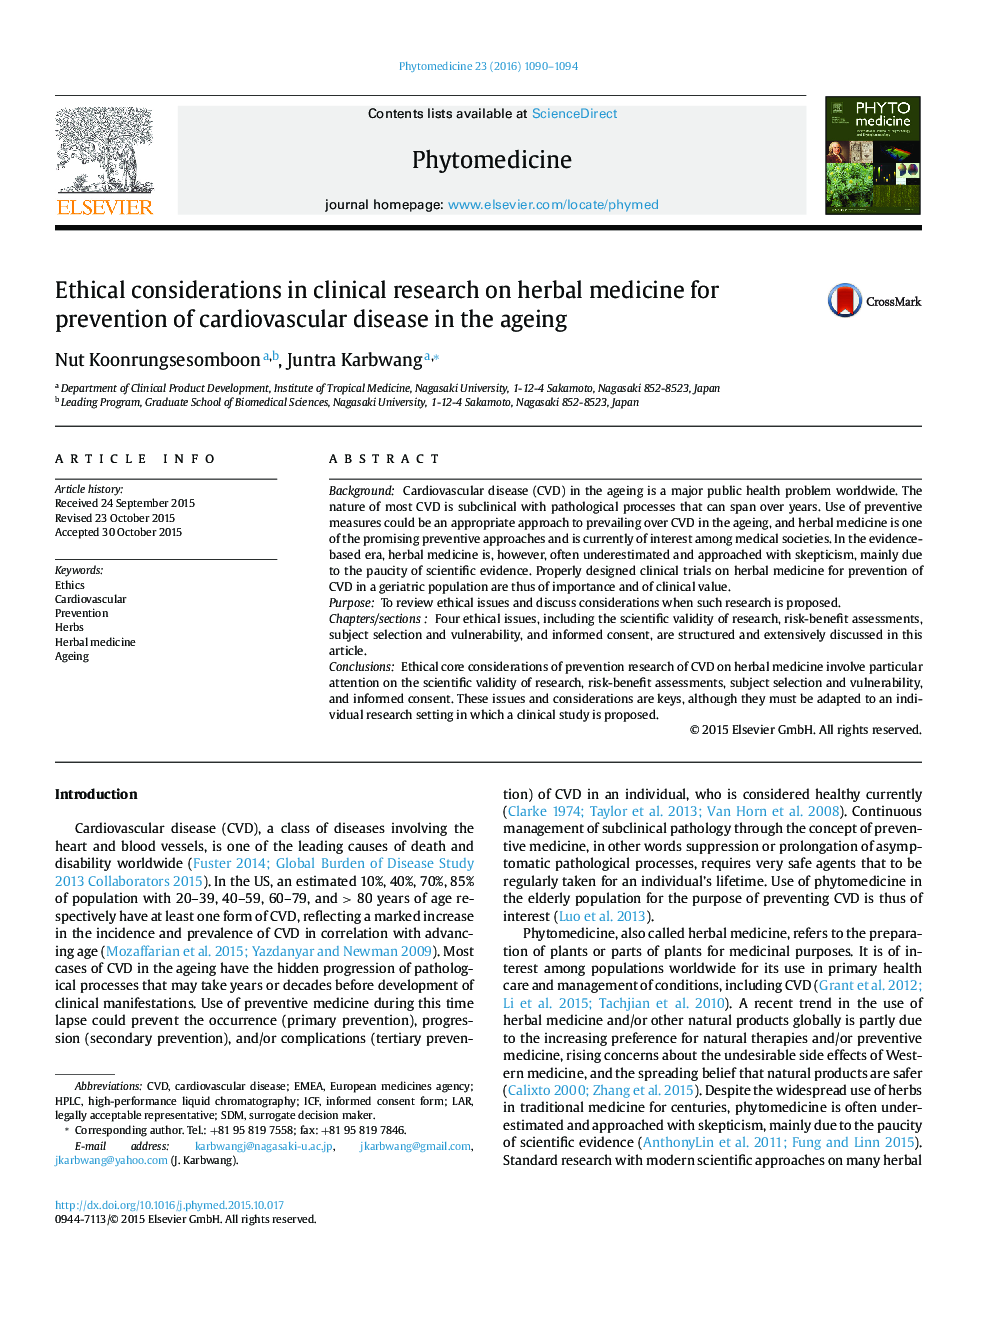 Ethical considerations in clinical research on herbal medicine for prevention of cardiovascular disease in the ageing